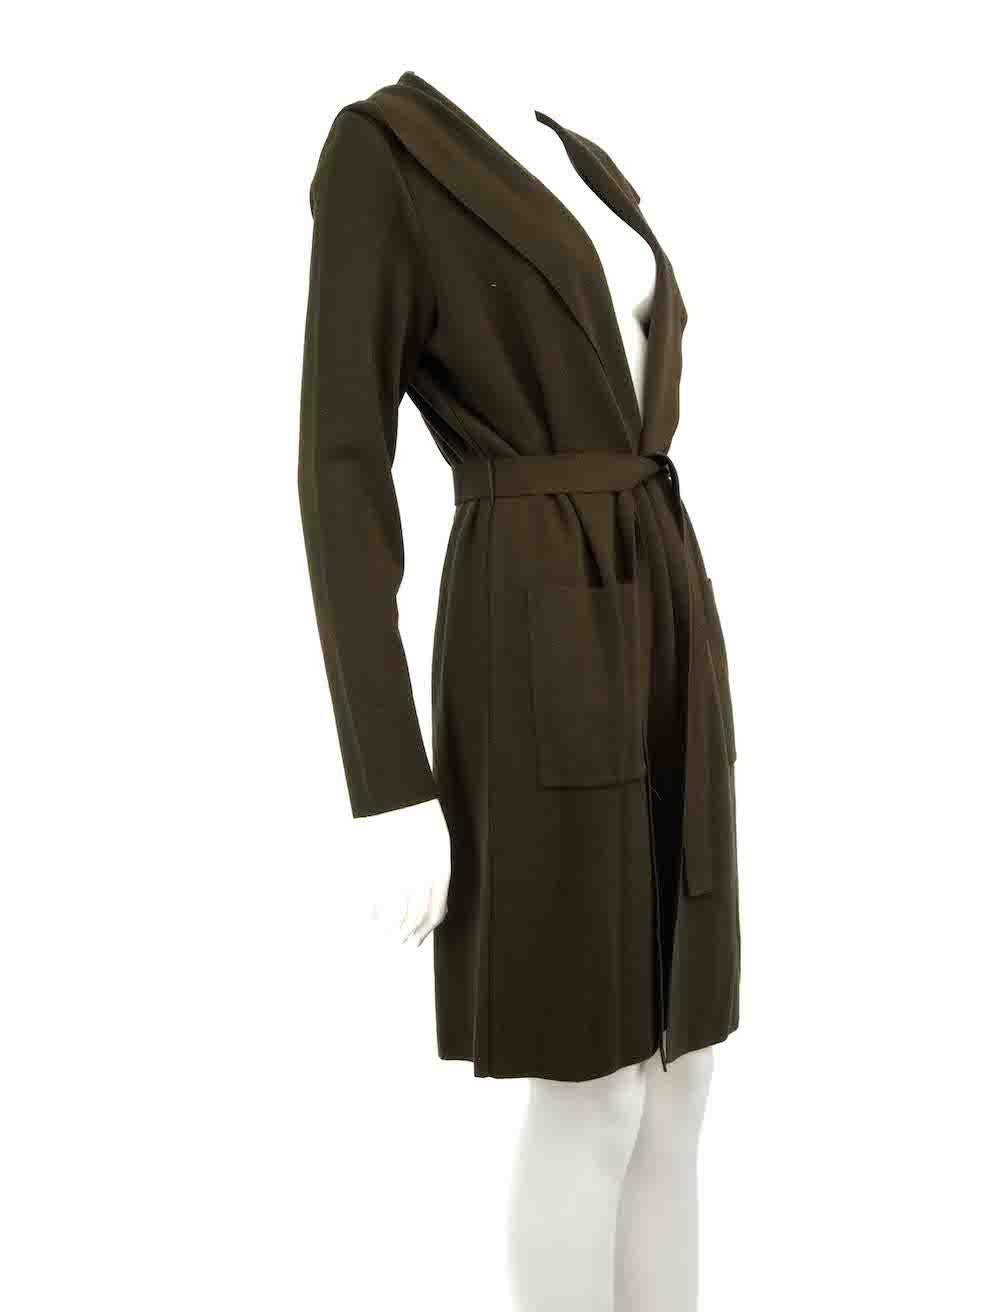 CONDITION is Very good. Hardly any visible wear to coat is evident on this used Max Mara designer resale item.
 
 Details
 Khaki
 Wool
 Knit coat
 Hooded
 Long sleeves
 Belt tie fastening
 2x Front pockets
 
 
 Made in Italy
 
 Composition
 100%